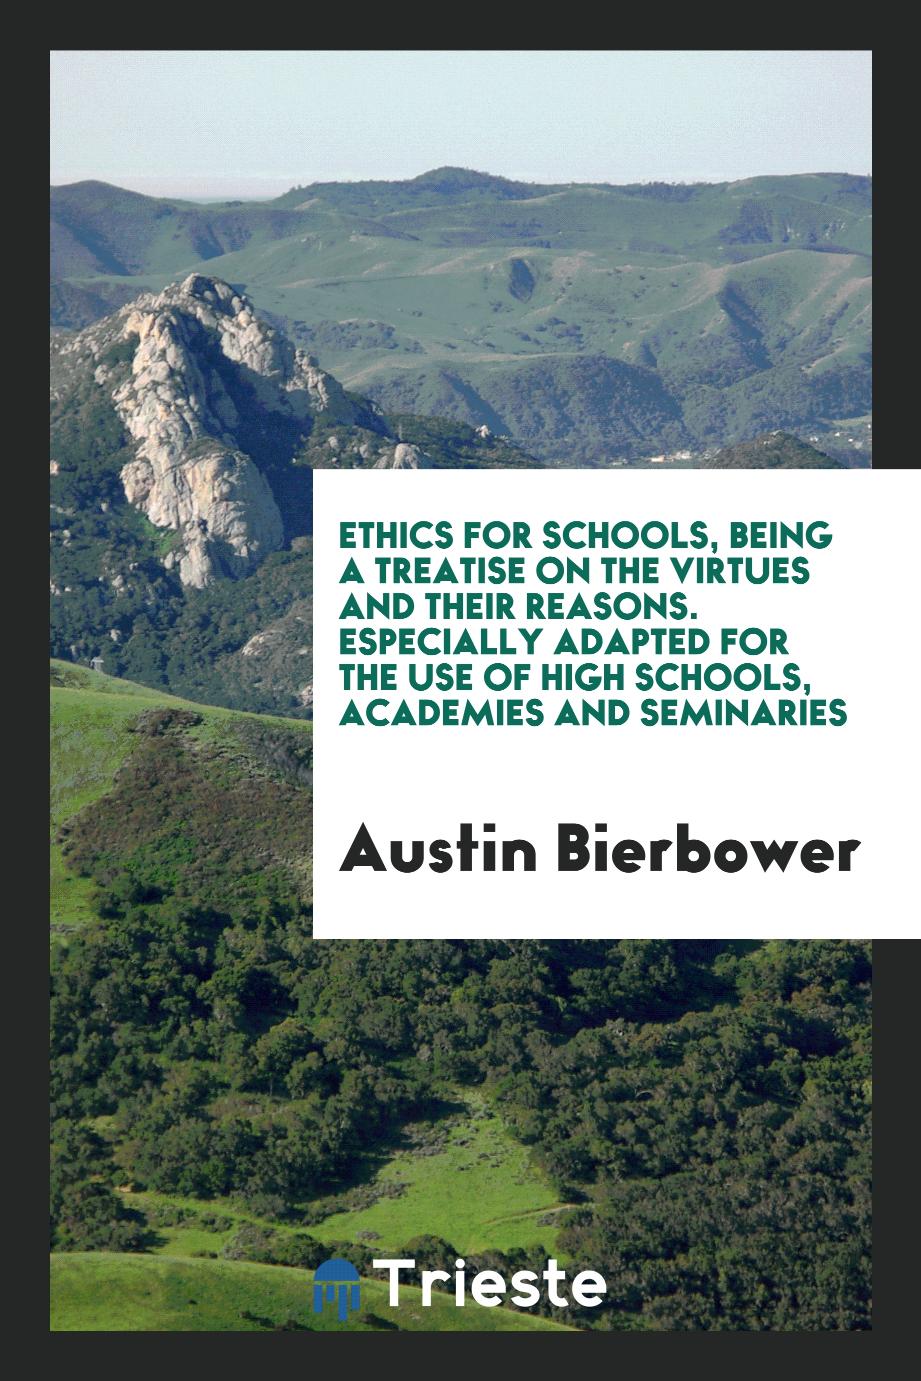 Ethics for Schools, Being a Treatise on the Virtues and Their Reasons. Especially Adapted for the Use of High Schools, Academies and Seminaries